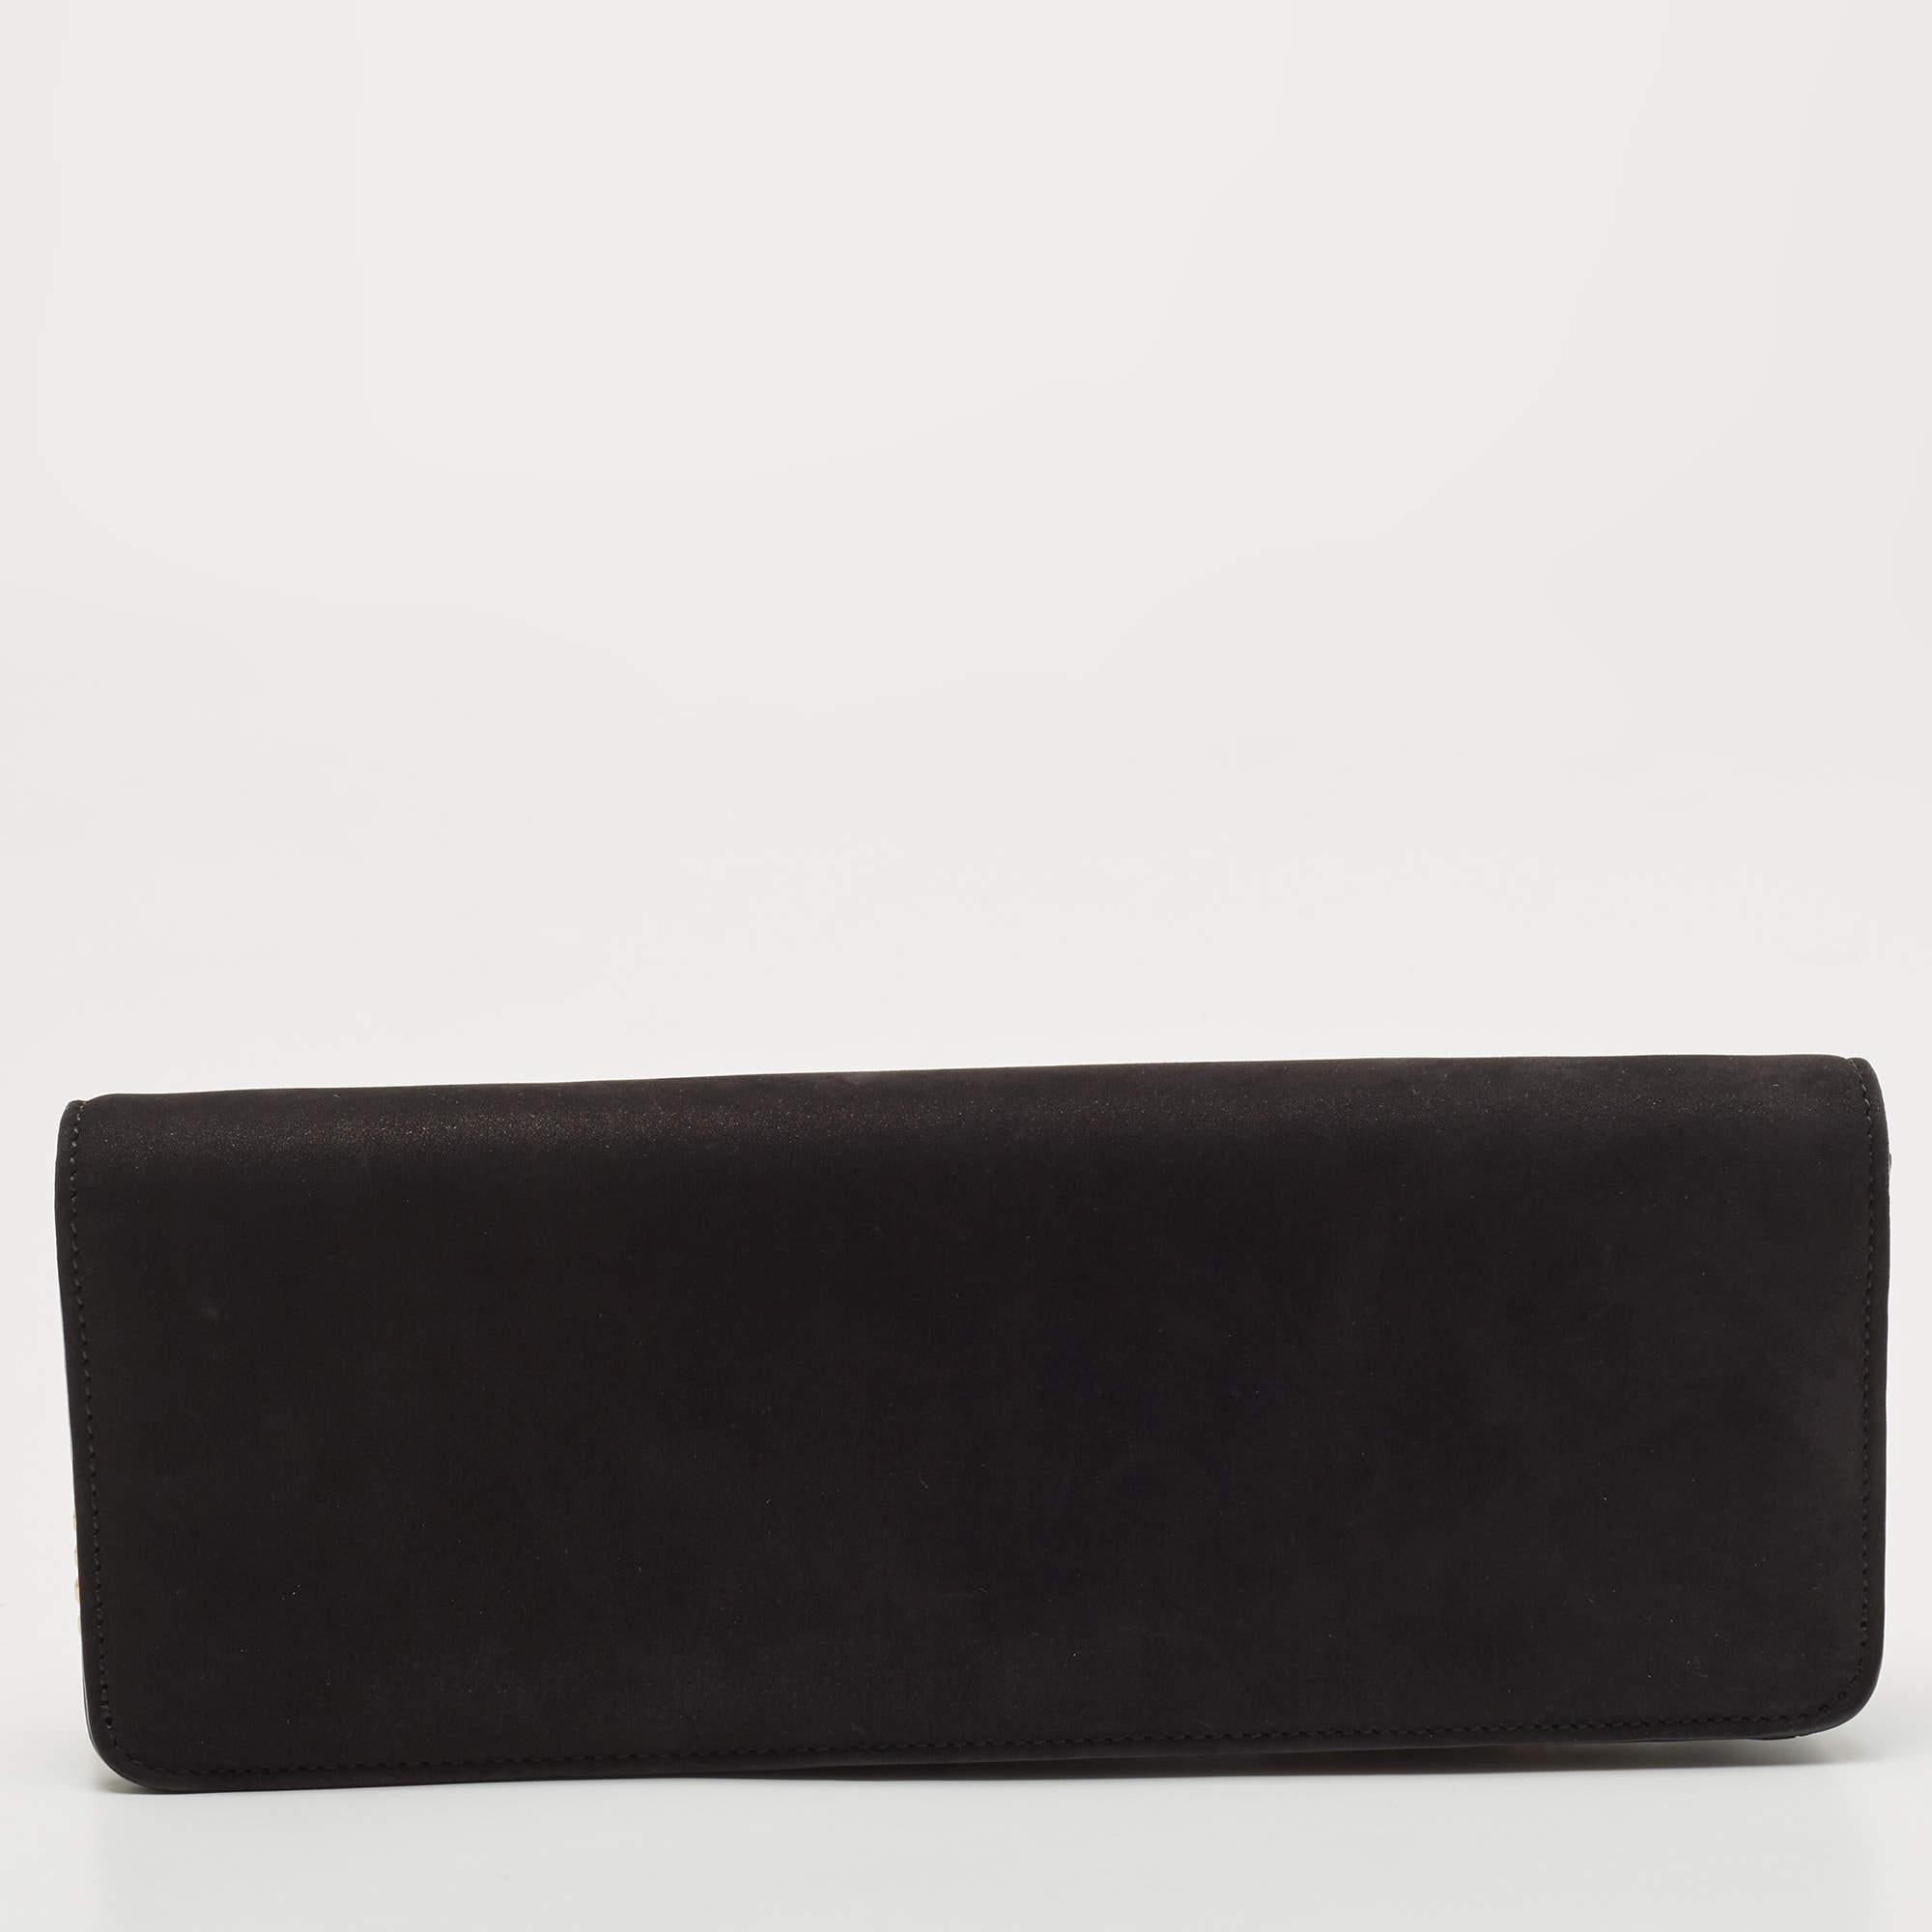 Crafted from quality materials, your wardrobe is missing out on this beautifully made designer clutch. Look your fashionable best in any outfit with this stylish clutch that promises to elevate your ensemble.

